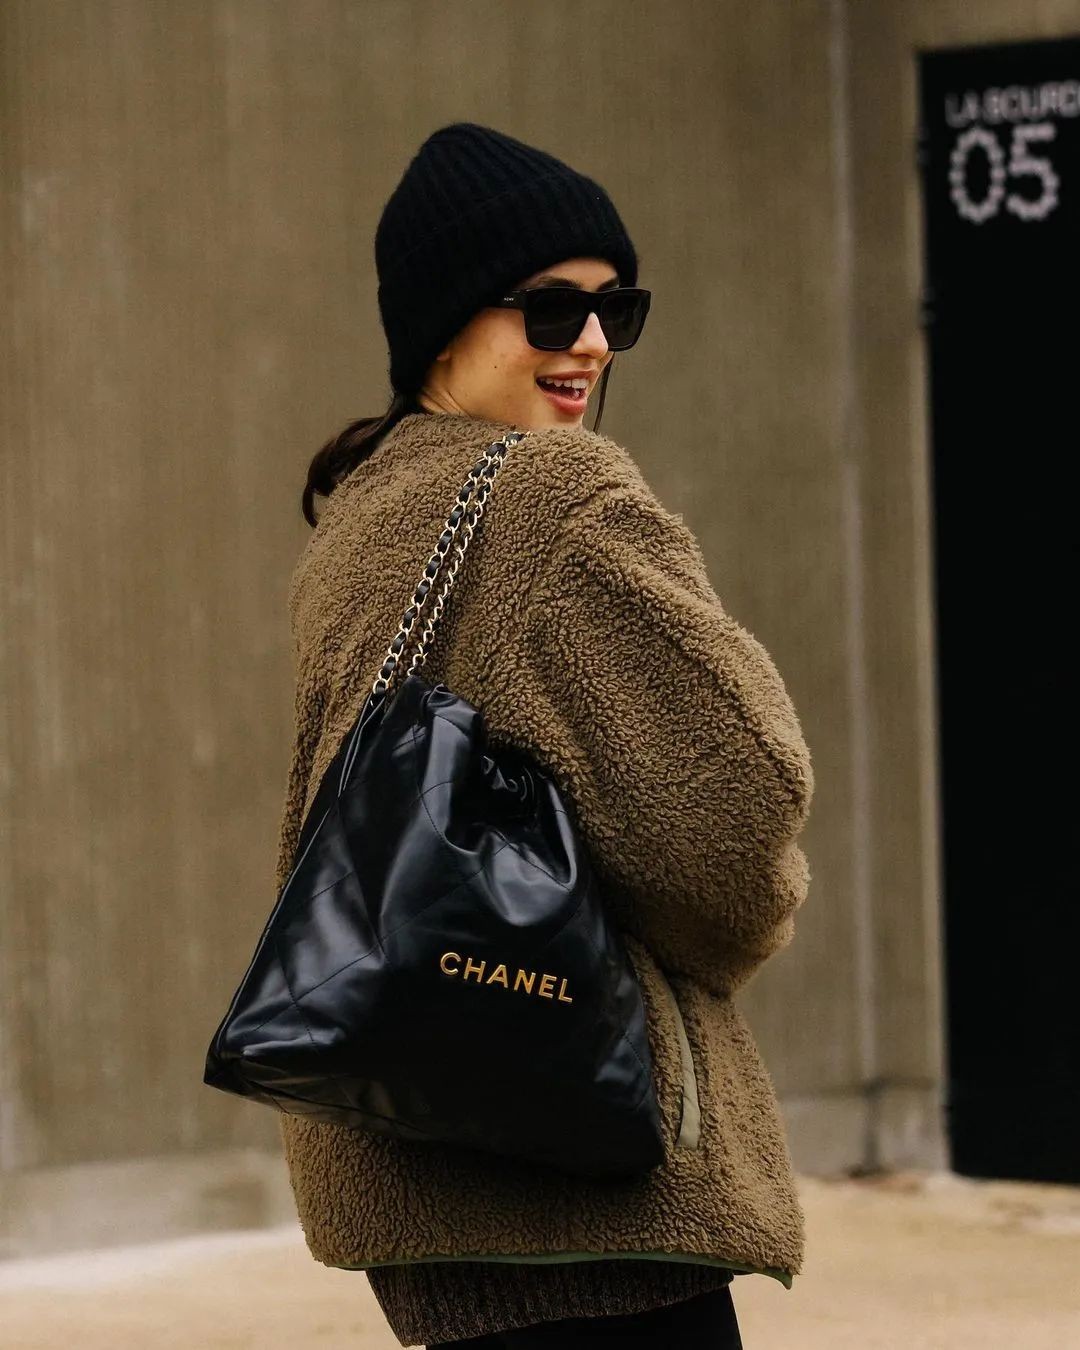 Chanel’s most popular Chanel 22 top quality replica bags (2022 updated)-Best Quality Fake Louis Vuitton Bag Online Store, Replica designer bag ru